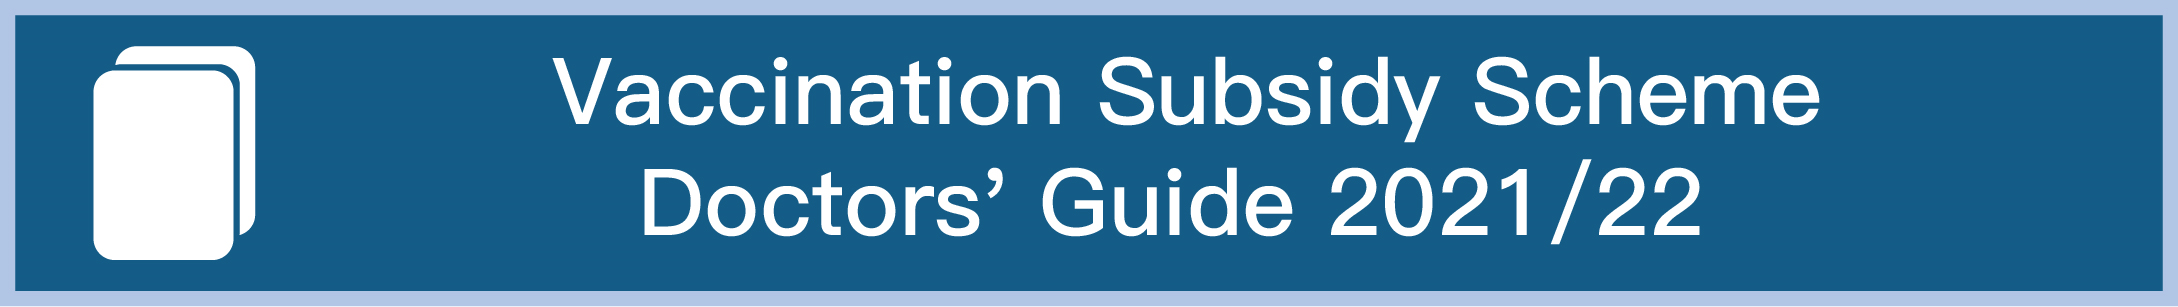 Vaccination Subsidy Scheme Doctors' Guide 2021/22